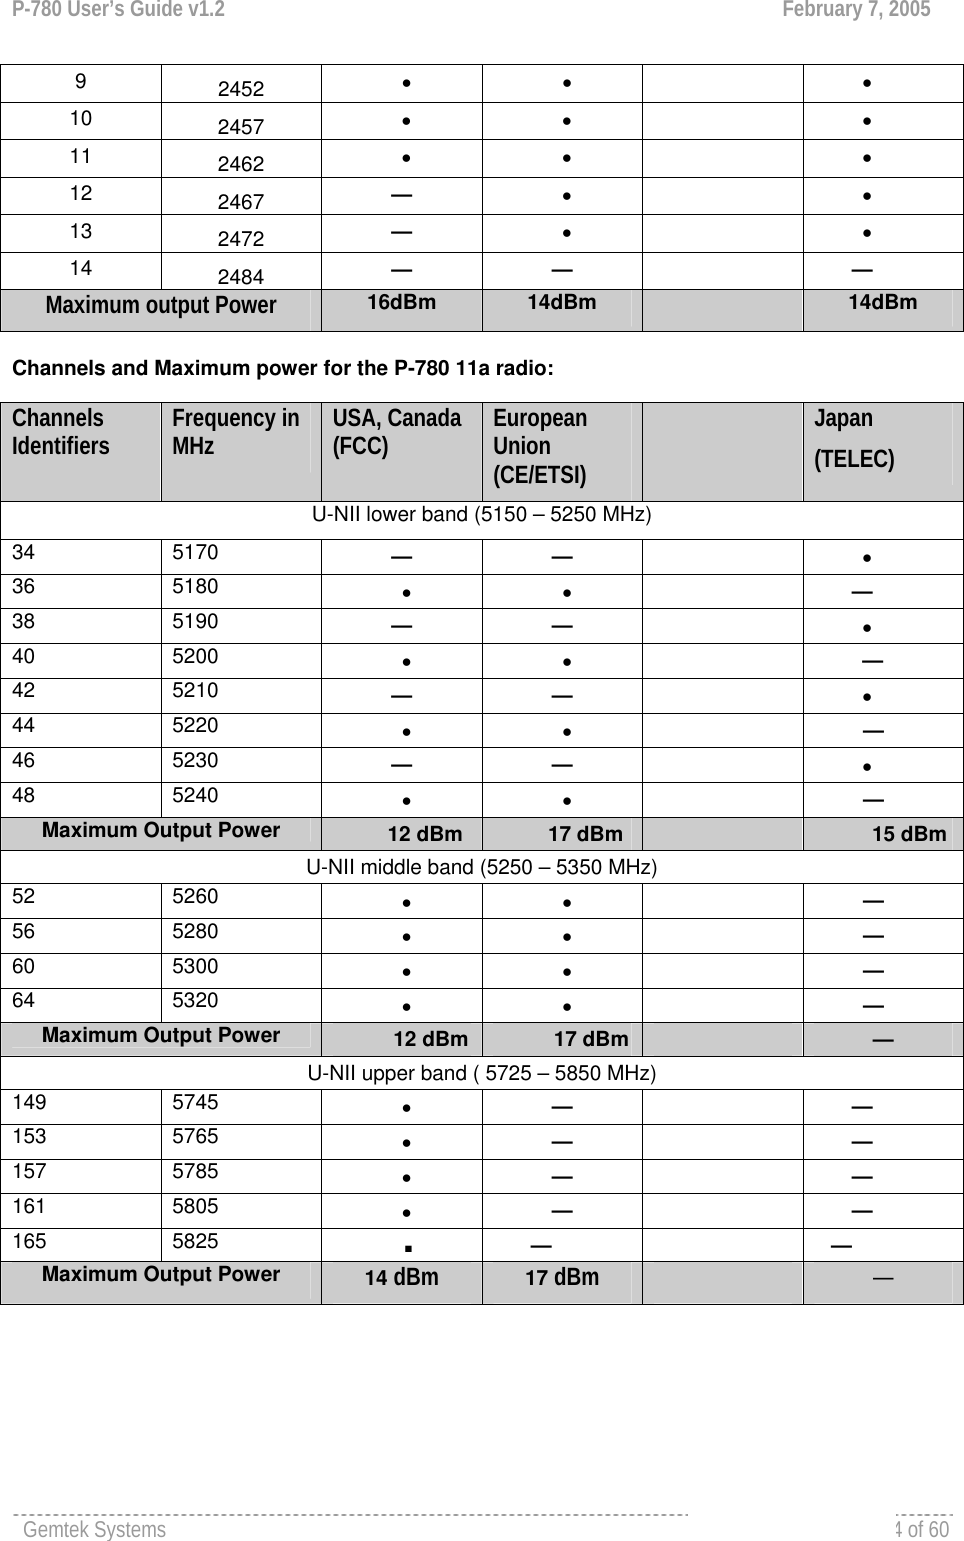 P-780 User’s Guide v1.2  February 7, 2005 Gemtek Systems  Page 54 of 60   9  2452 •  •       •  10  2457 •  •       •  11  2462 •  •       •  12  2467 — •   •  13  2472 — •   •  14  2484 — —  — Maximum output Power   16dBm  14dBm  14dBm  Channels and Maximum power for the P-780 11a radio:   Channels Identifiers  Frequency in MHz  USA, Canada (FCC)  European Union (CE/ETSI)   Japan (TELEC) U-NII lower band (5150 – 5250 MHz) 34 5170  — —  •  36 5180  •  •       — 38 5190  — —  •  40 5200  •  •       — 42 5210  — —  •  44 5220  •  •    — 46 5230  — —  •  48 5240  •  •    — Maximum Output Power      12 dBm    17 dBm                15 dBmU-NII middle band (5250 – 5350 MHz) 52                  5260  •  •    — 56                  5280  •  •    — 60        5300  •  •    — 64 5320  •  •    — Maximum Output Power      12 dBm     17 dBm      — U-NII upper band ( 5725 – 5850 MHz) 149 5745  •  —  — 153 5765  •  —  — 157 5785  •  —  — 161 5805  •  —  — 165 5825   —  — Maximum Output Power   14 dBm 17 dBm —  . 